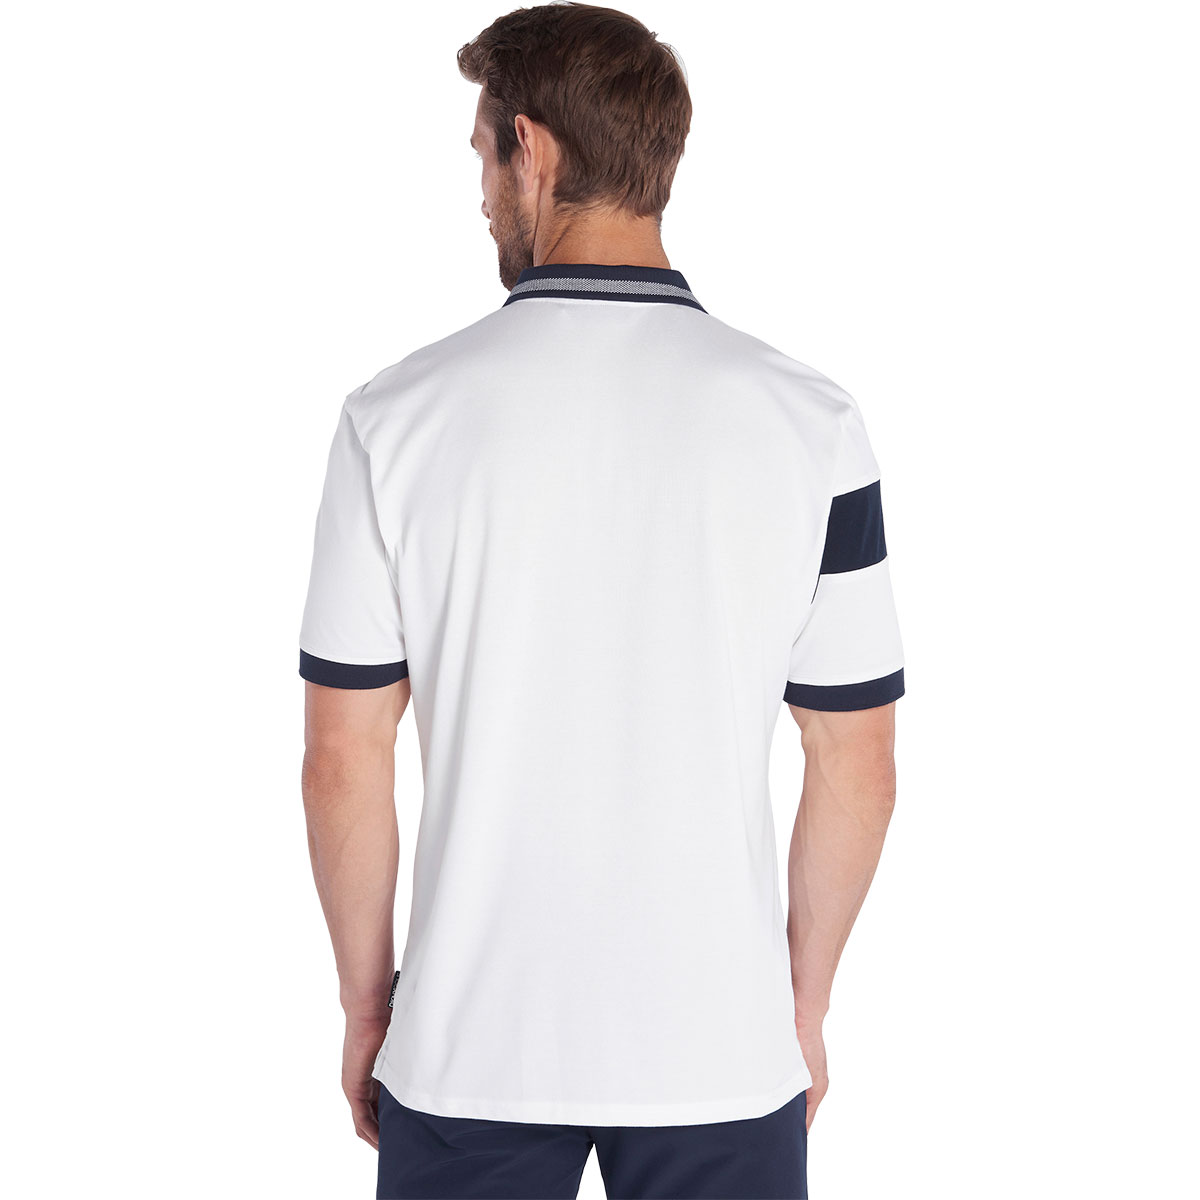 DKNY Men's Sunset Park Stretch Golf Polo Shirt from american golf